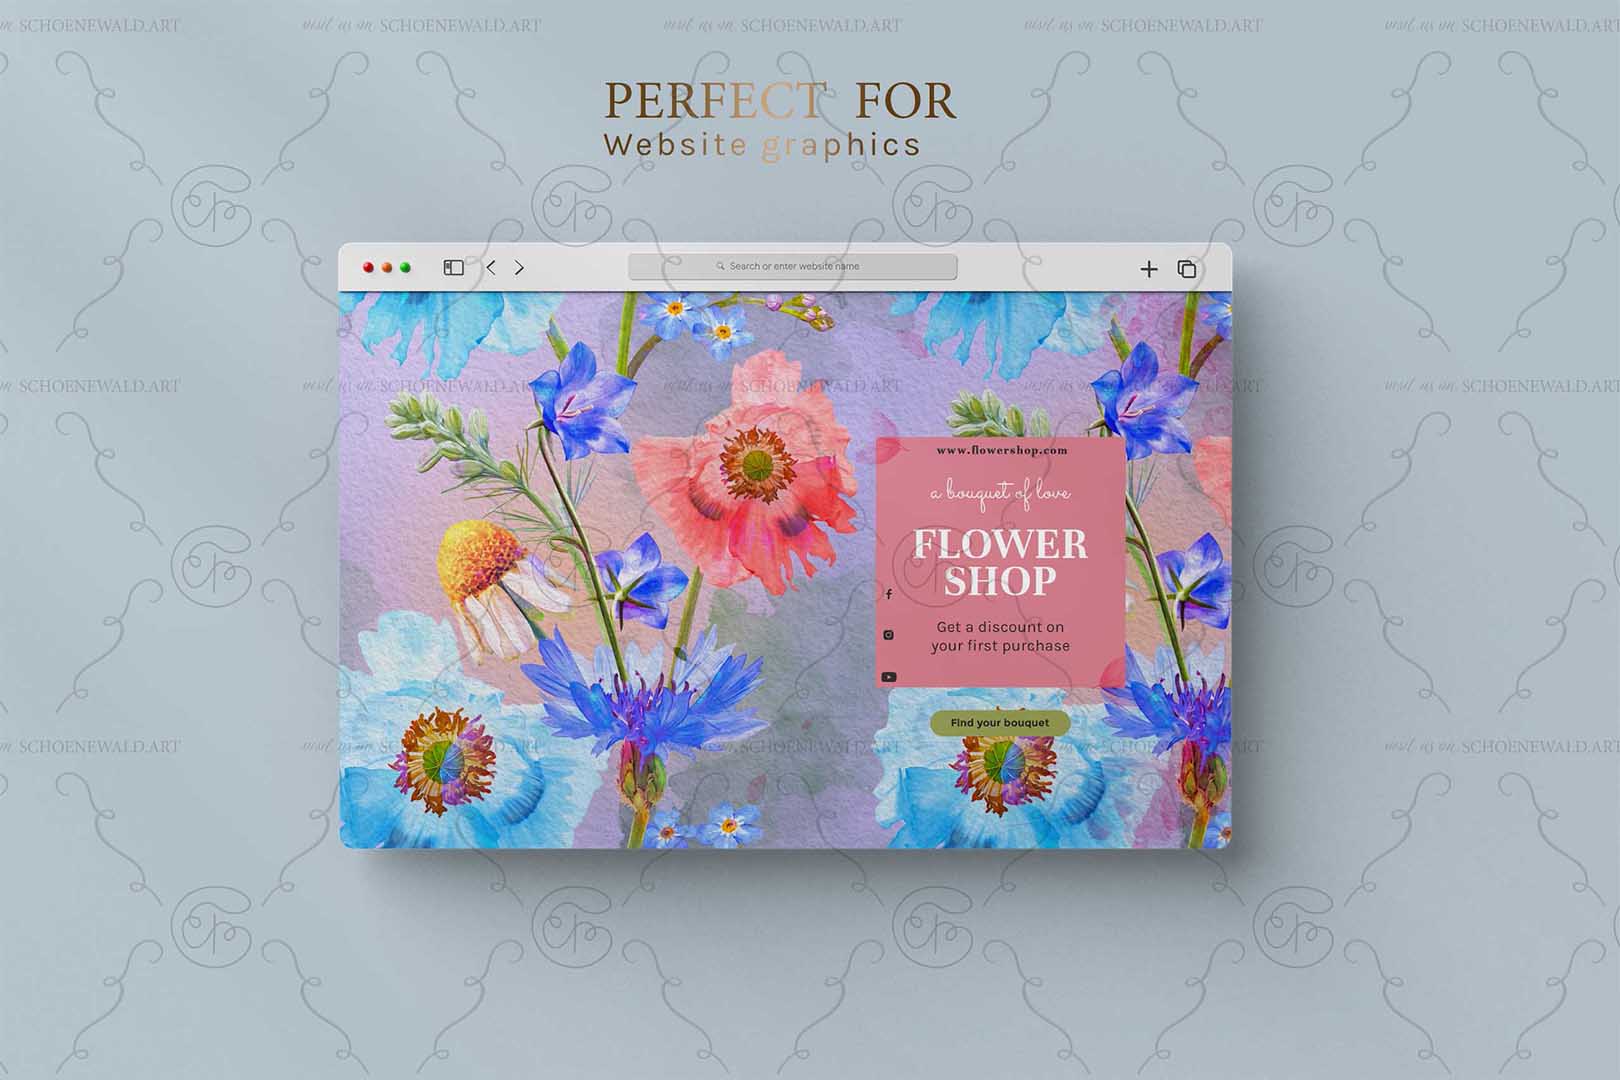 Website design for a florist with the graphic pattern from "Meadow Magic" set by Schoenewald.art - unique watercolor paintings of meadow flowers